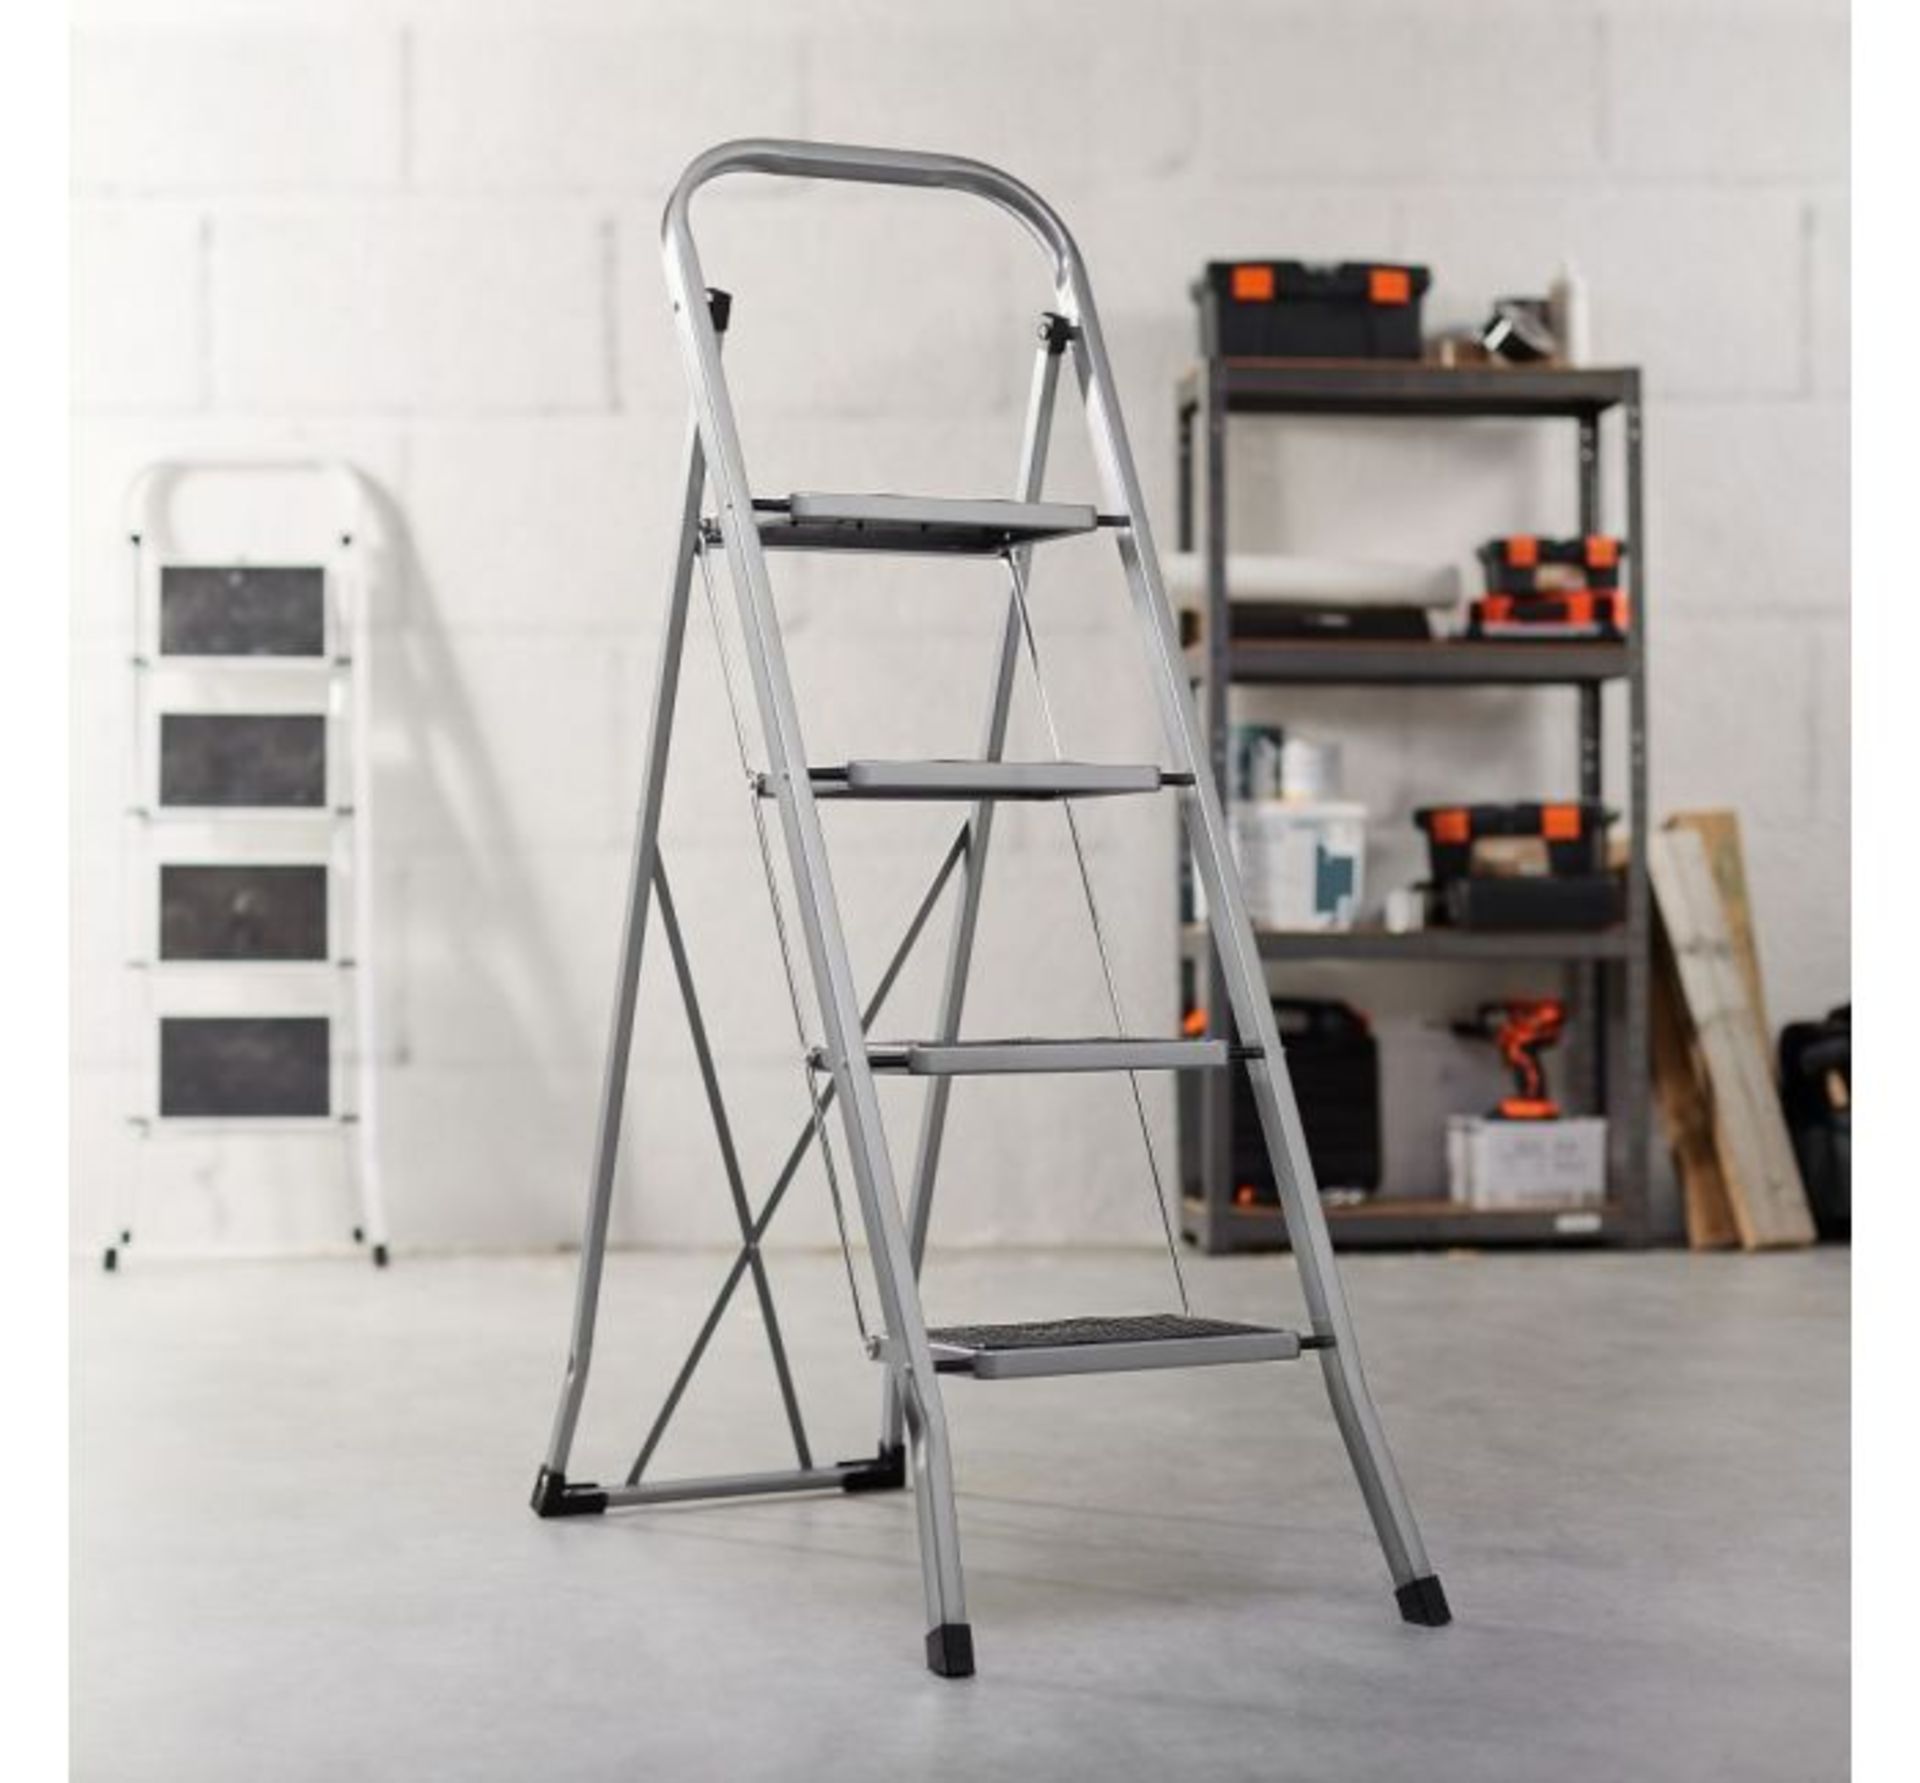 (HZ117) 4 Step Steel Ladder Distributes weight evenly for total stability Top hand rail and a...